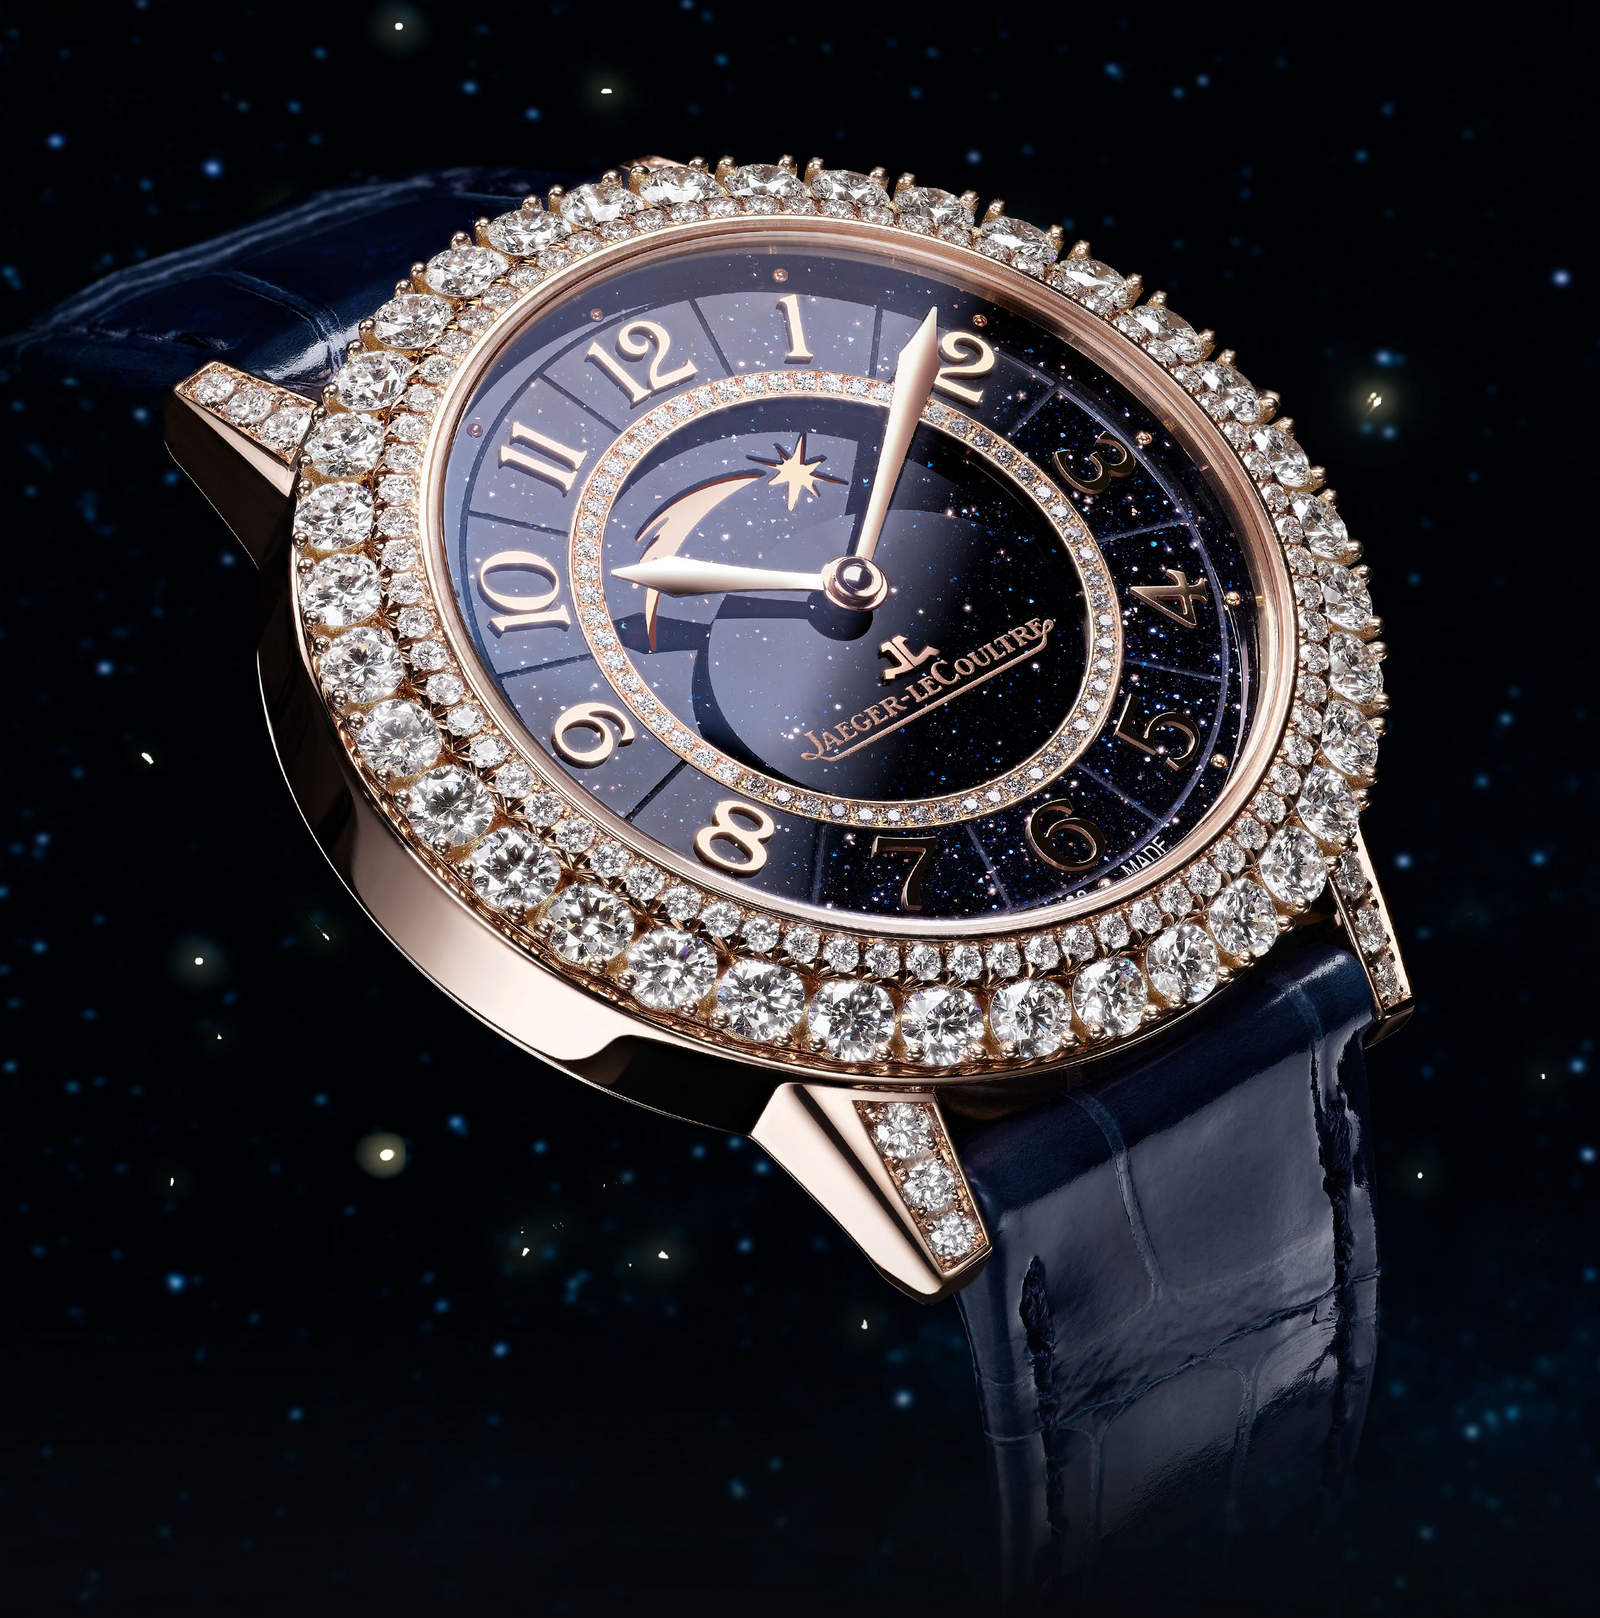 Jaeger-LeCoultre’s Rendez-Vous Dazzling Star timepiece brings shooting stars to your wrists